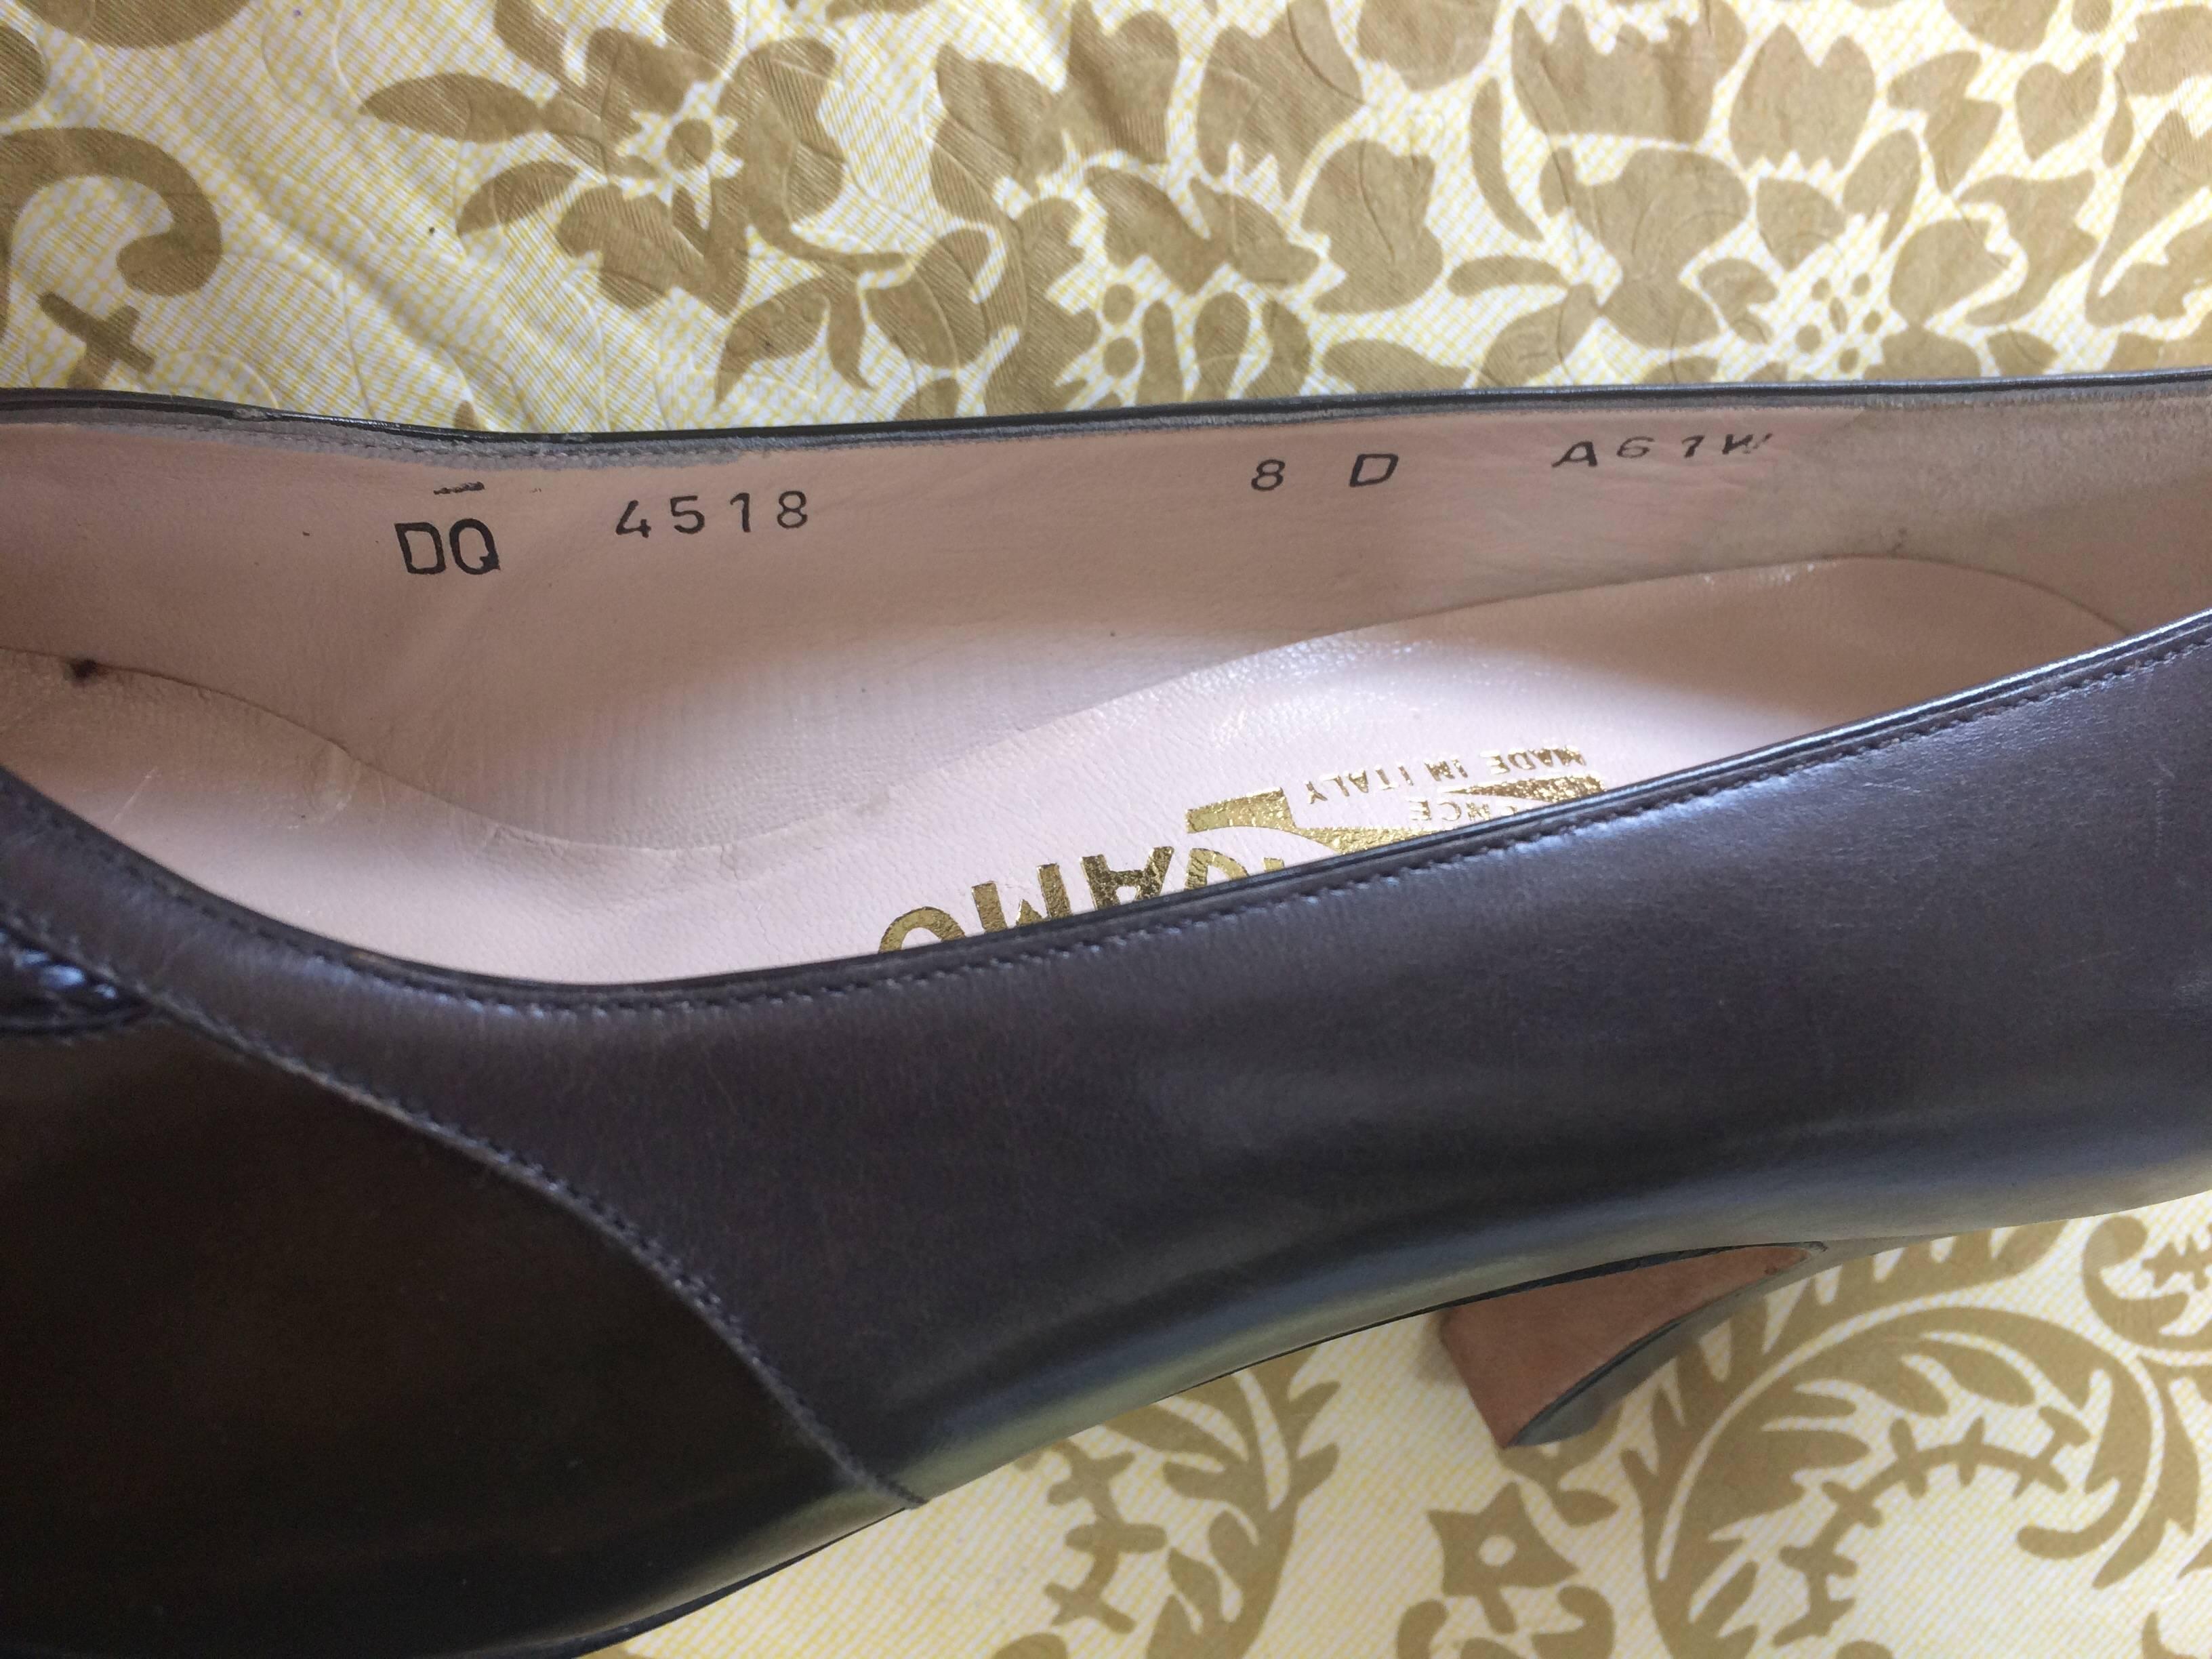 Gray Vintage Salvatore Ferragamo grey and dark brown leather pumps with snakeskin. 8D For Sale